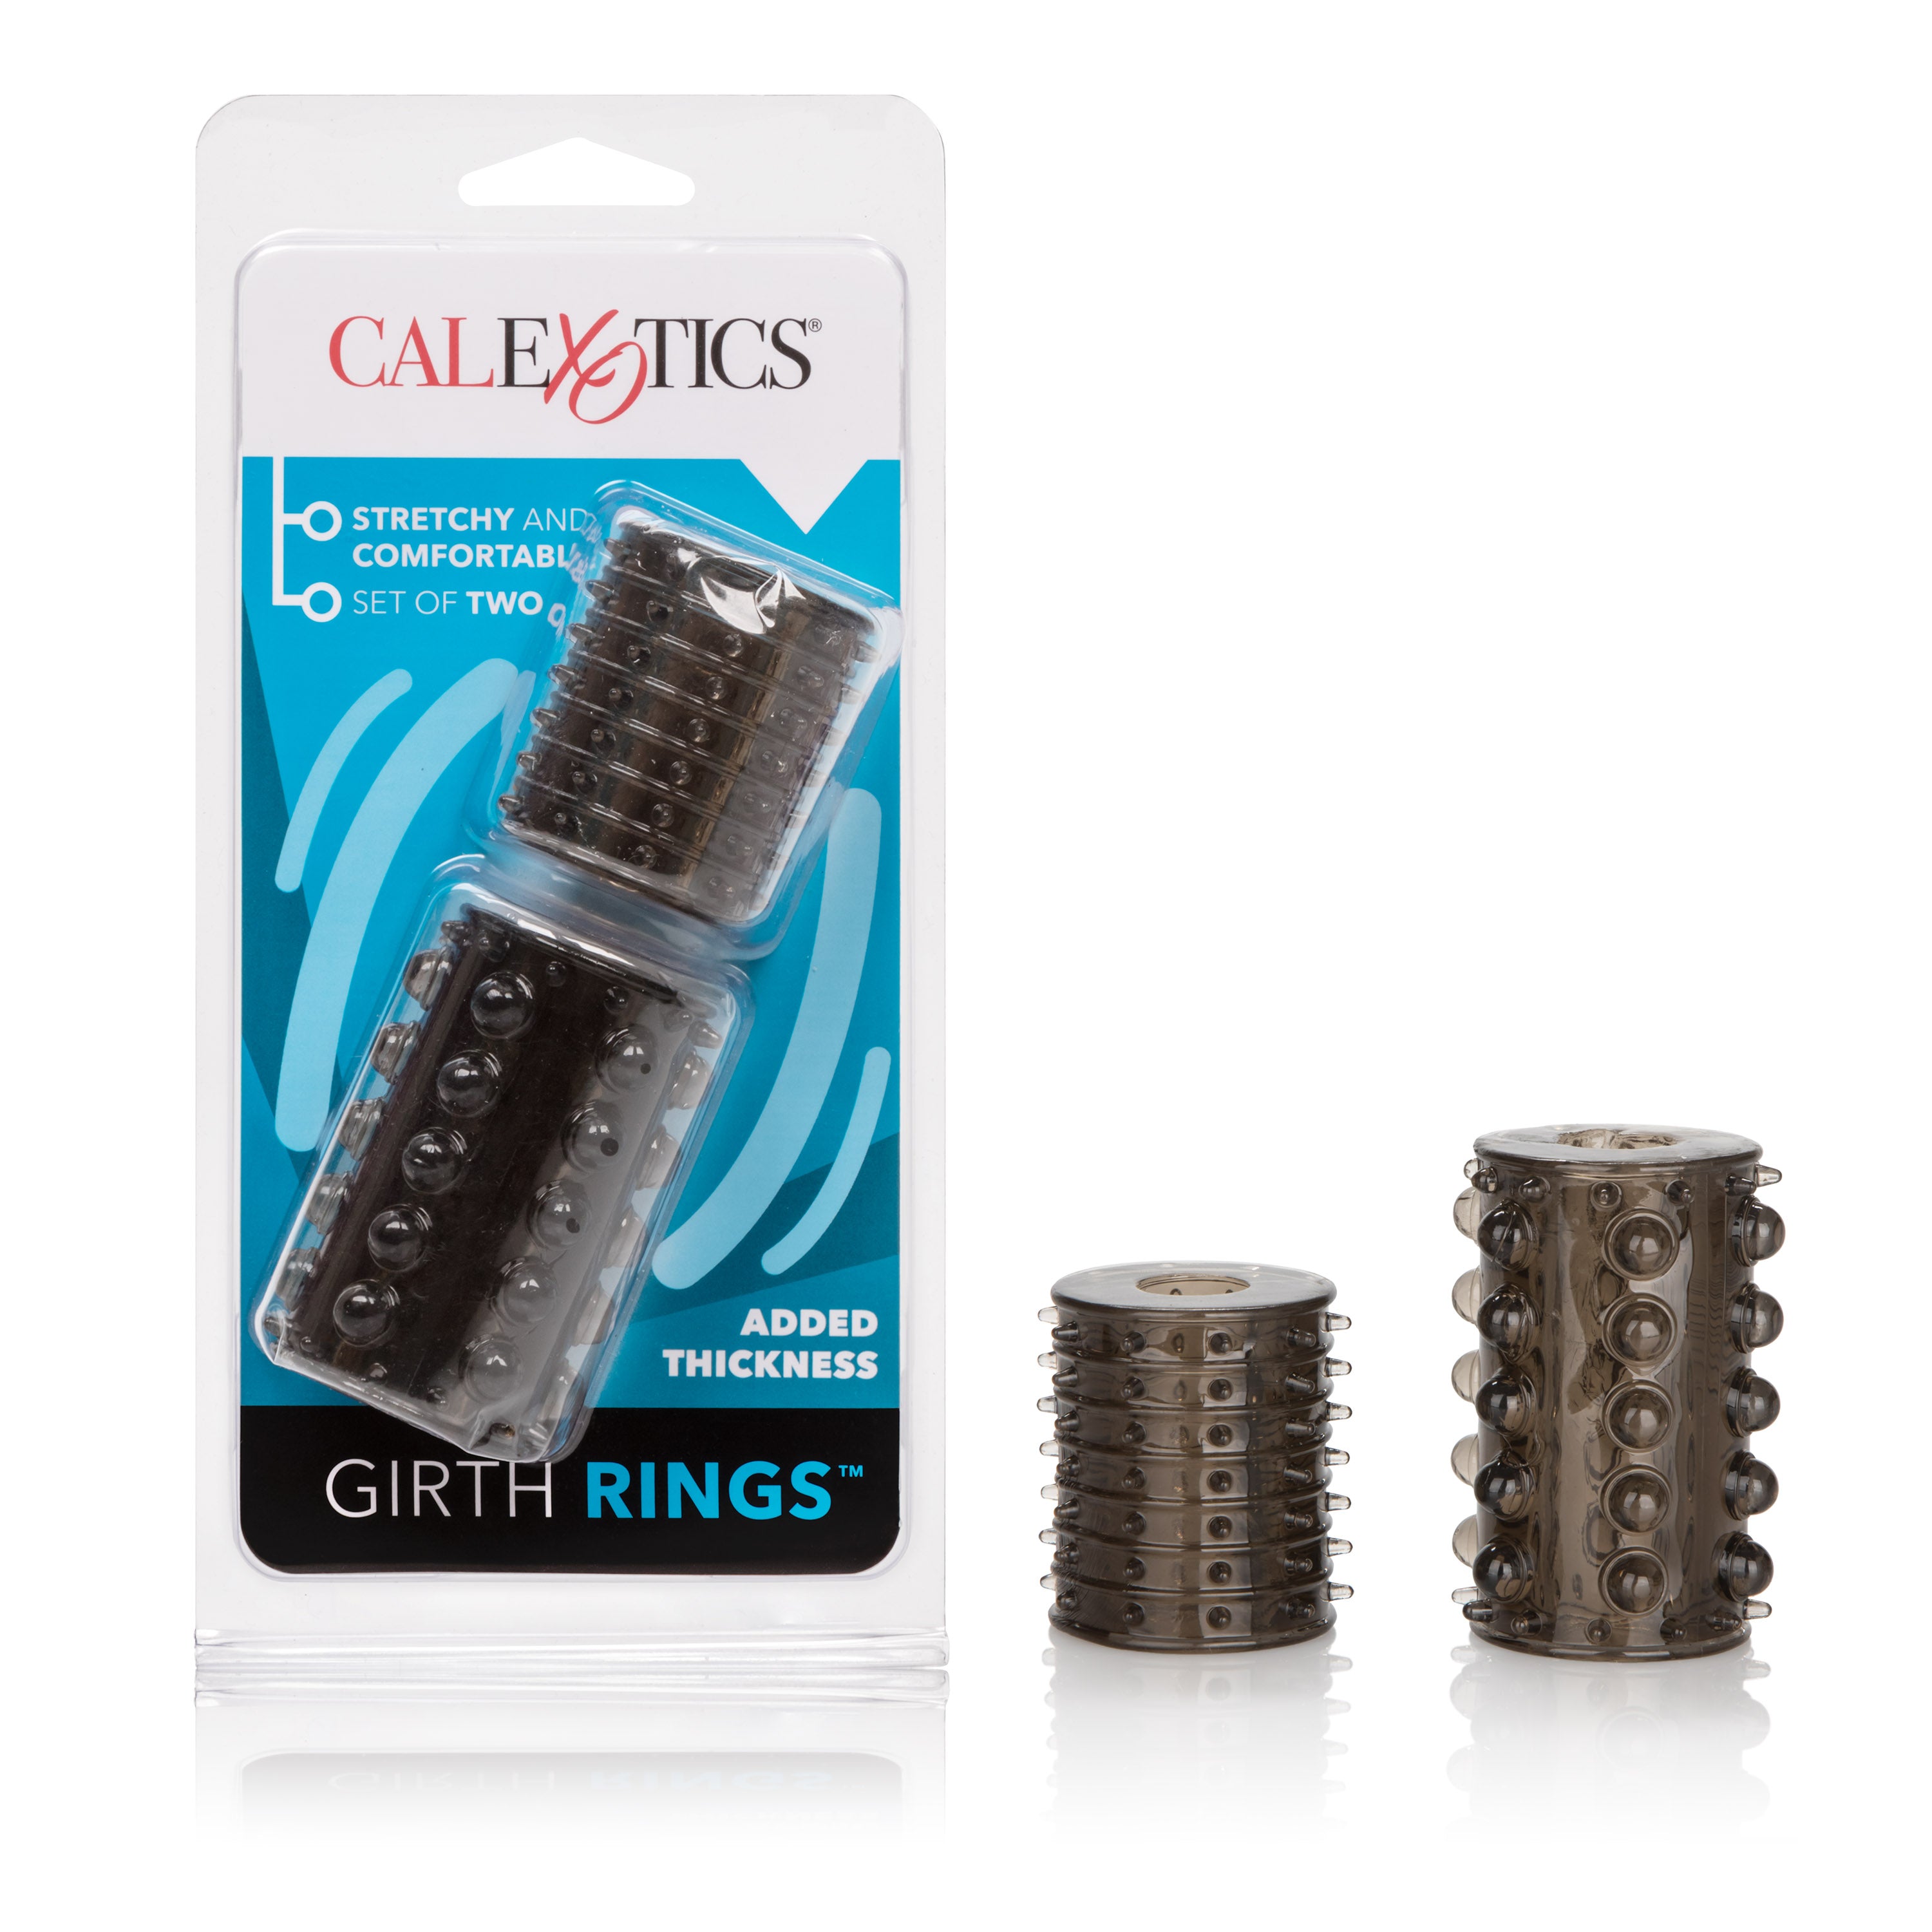 Silicone Girth Rings - Stretch Y Enhancement for Support And Girth